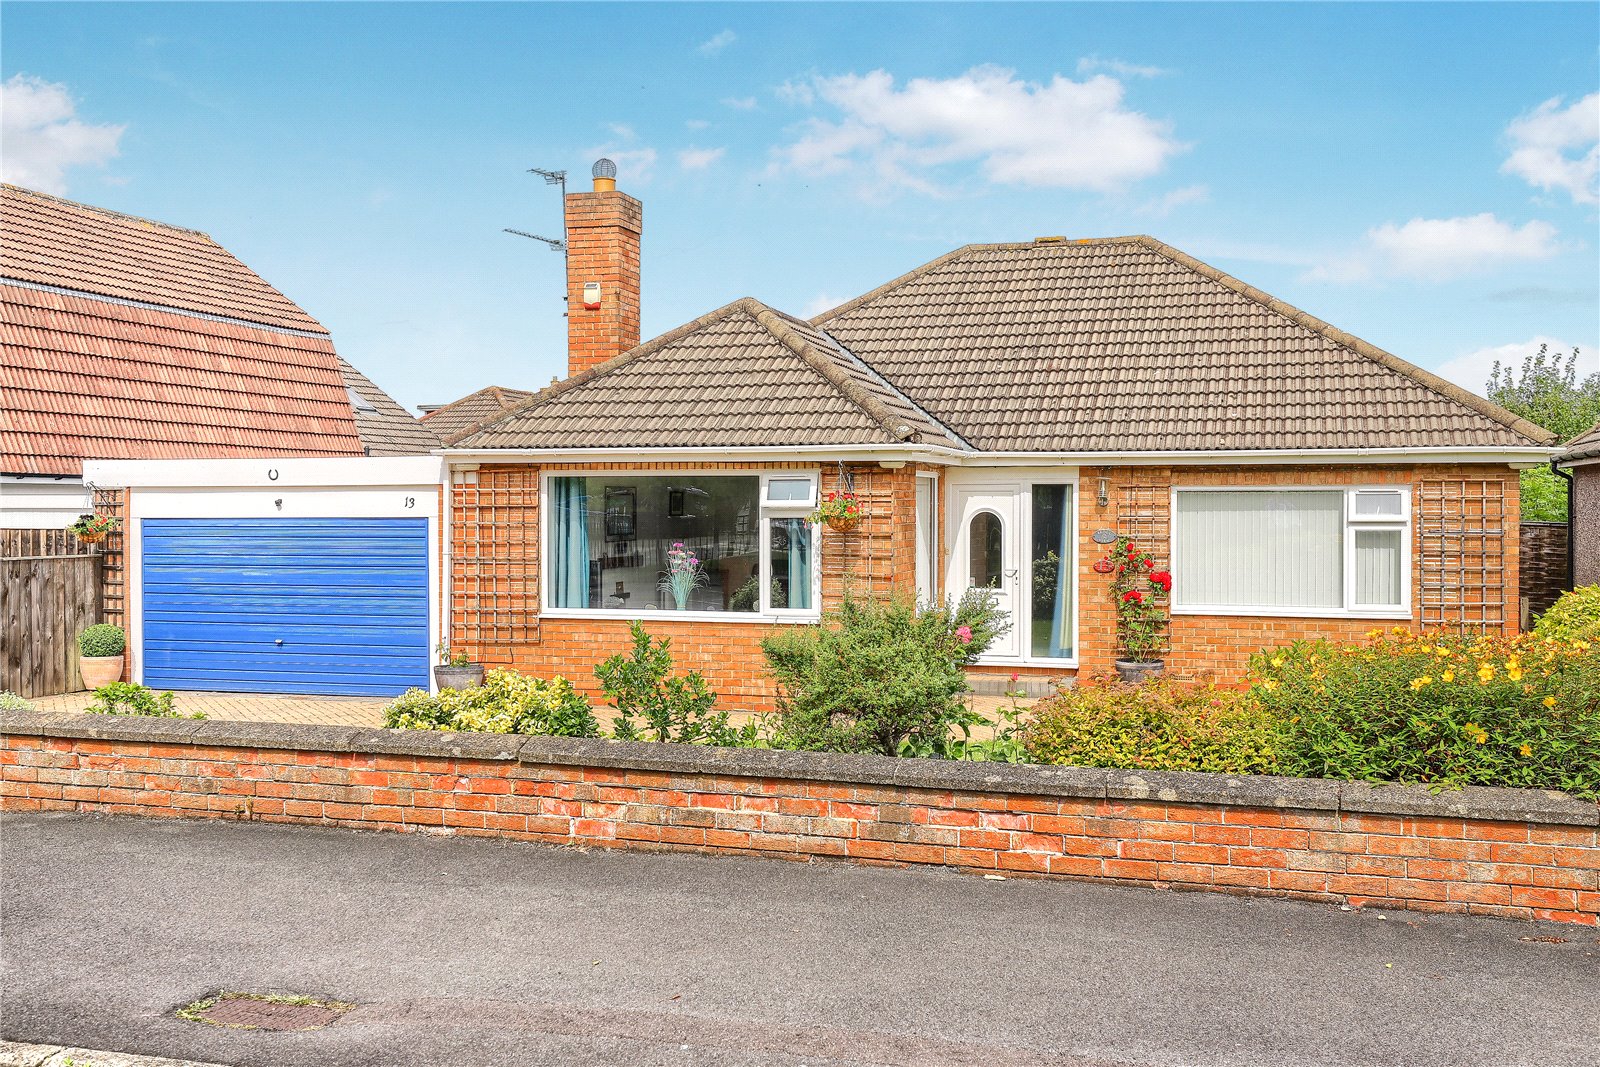 3 bed bungalow for sale in Buxton Avenue, Marton - Property Image 1